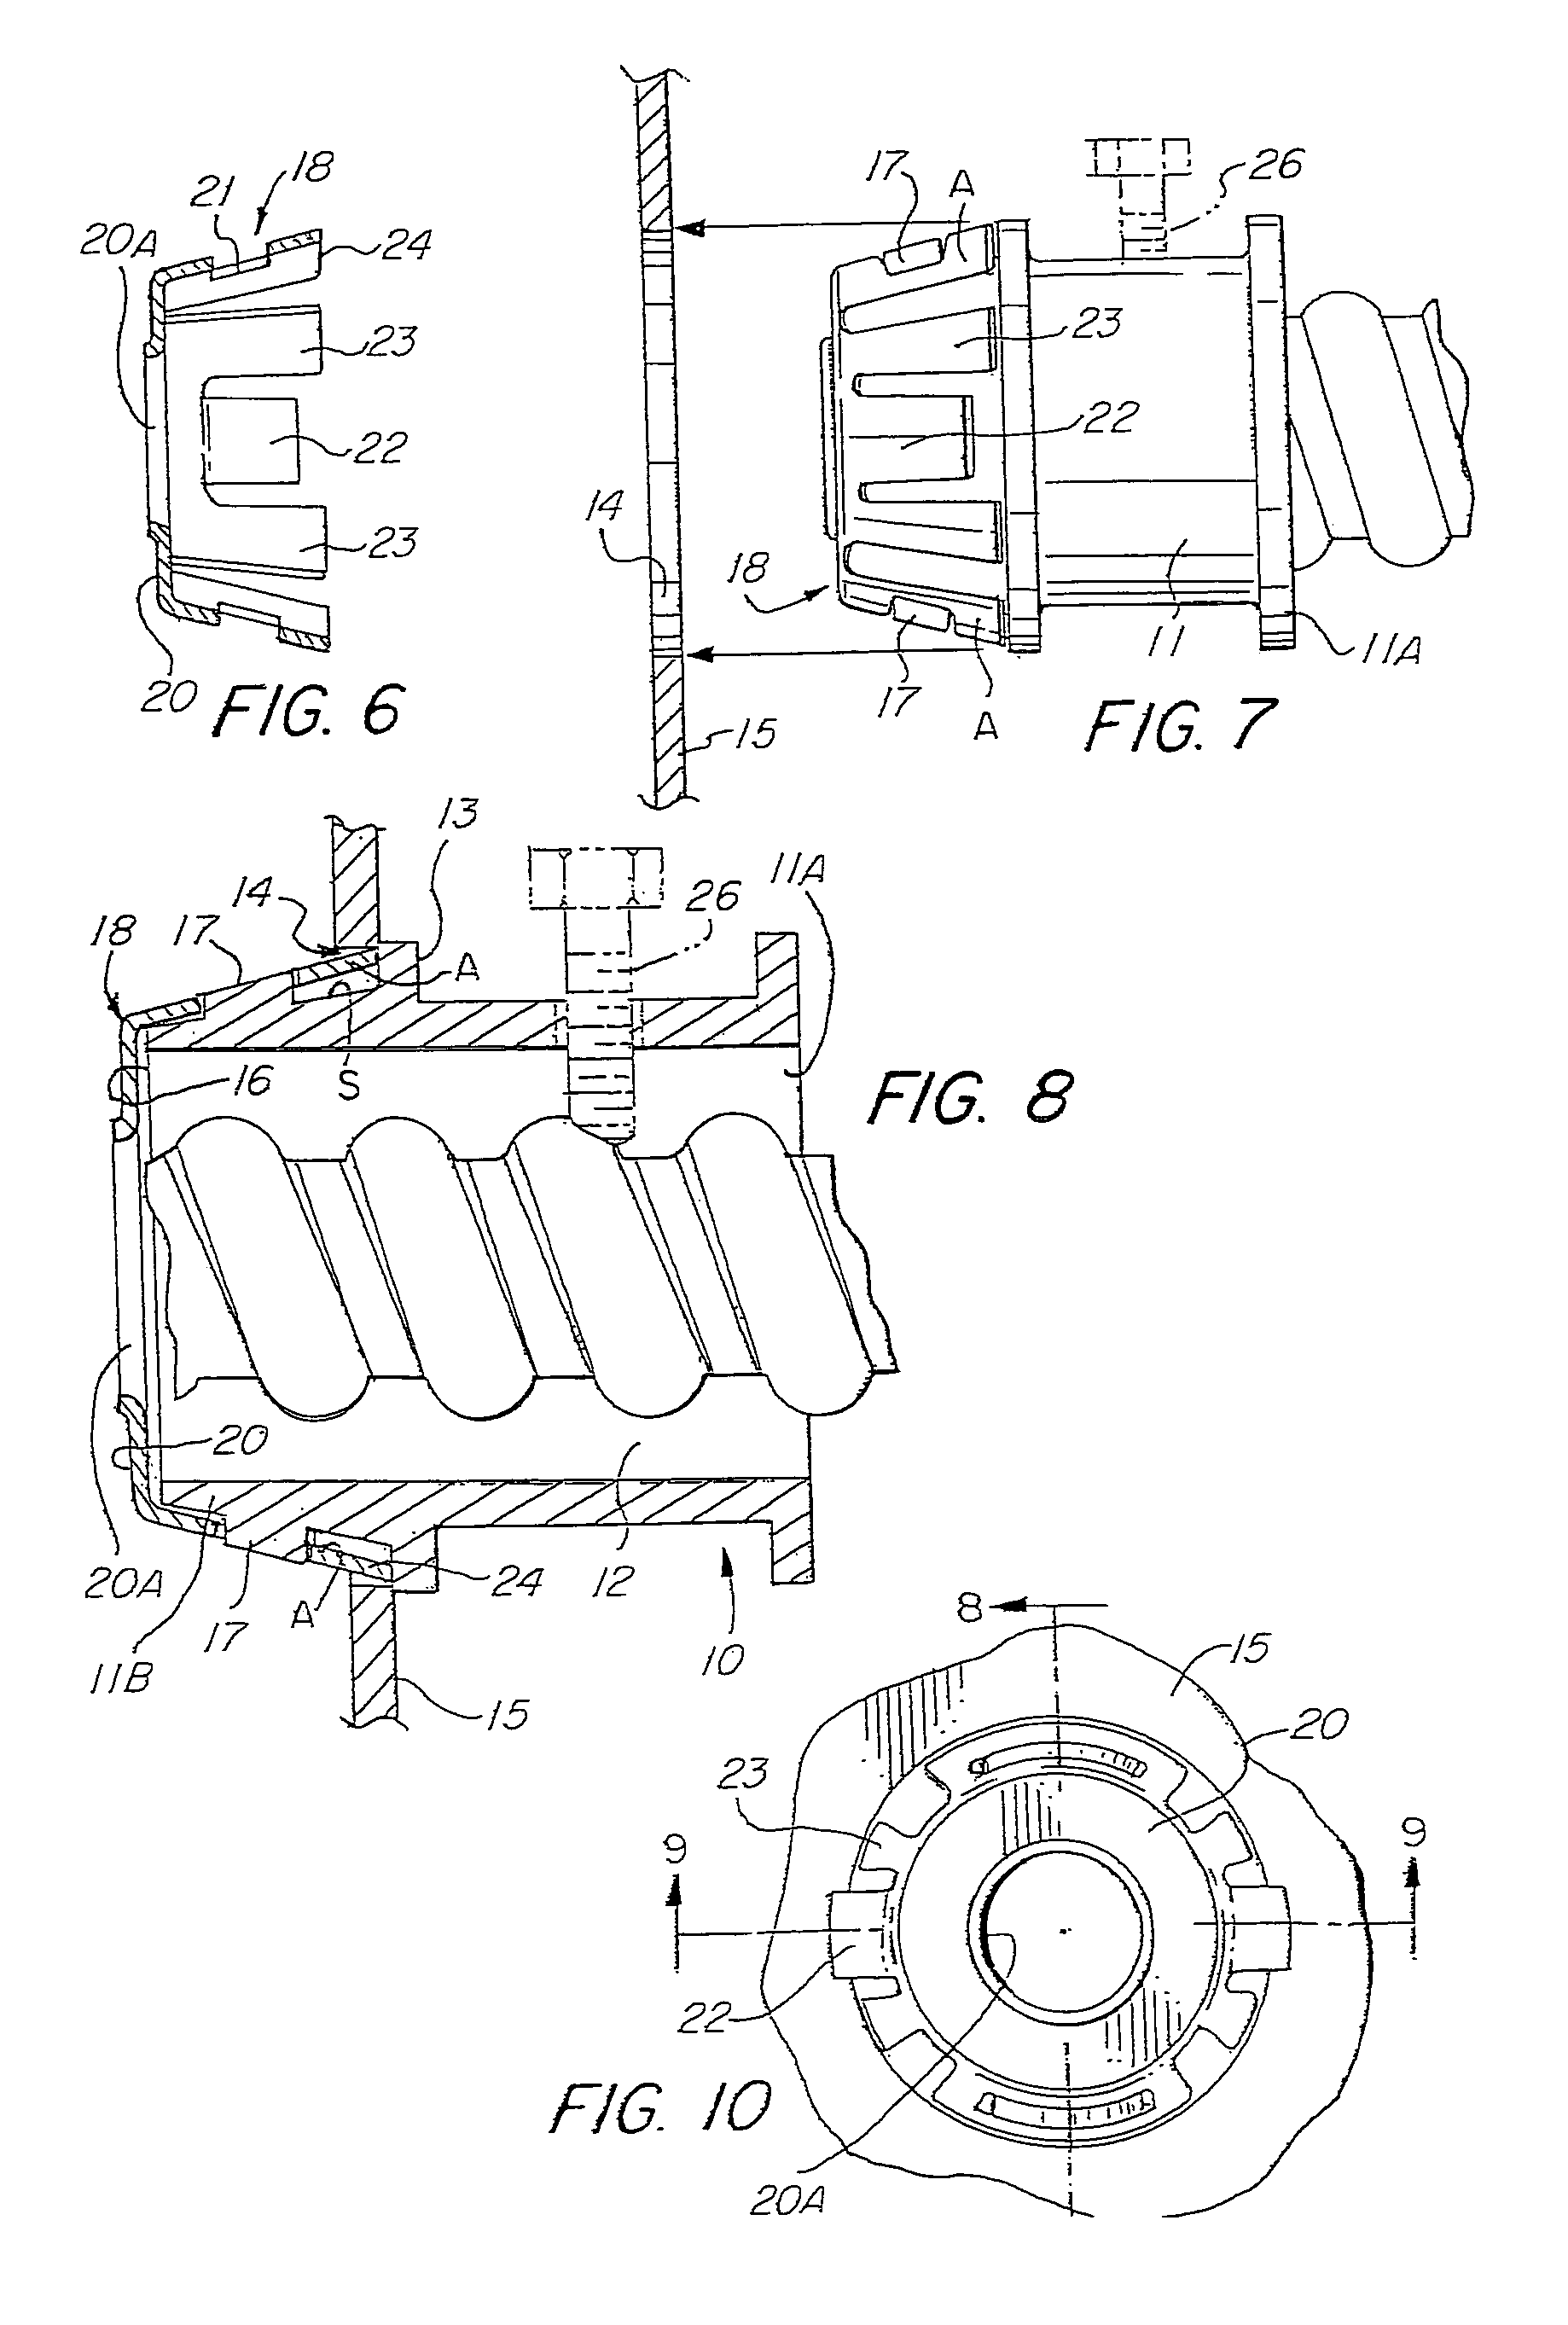 Electrical connector having an outlet end angularly disposed relative an inlet end with outer retainer ring about the outlet end and internal unidirectional conductor retainer in the inlet end